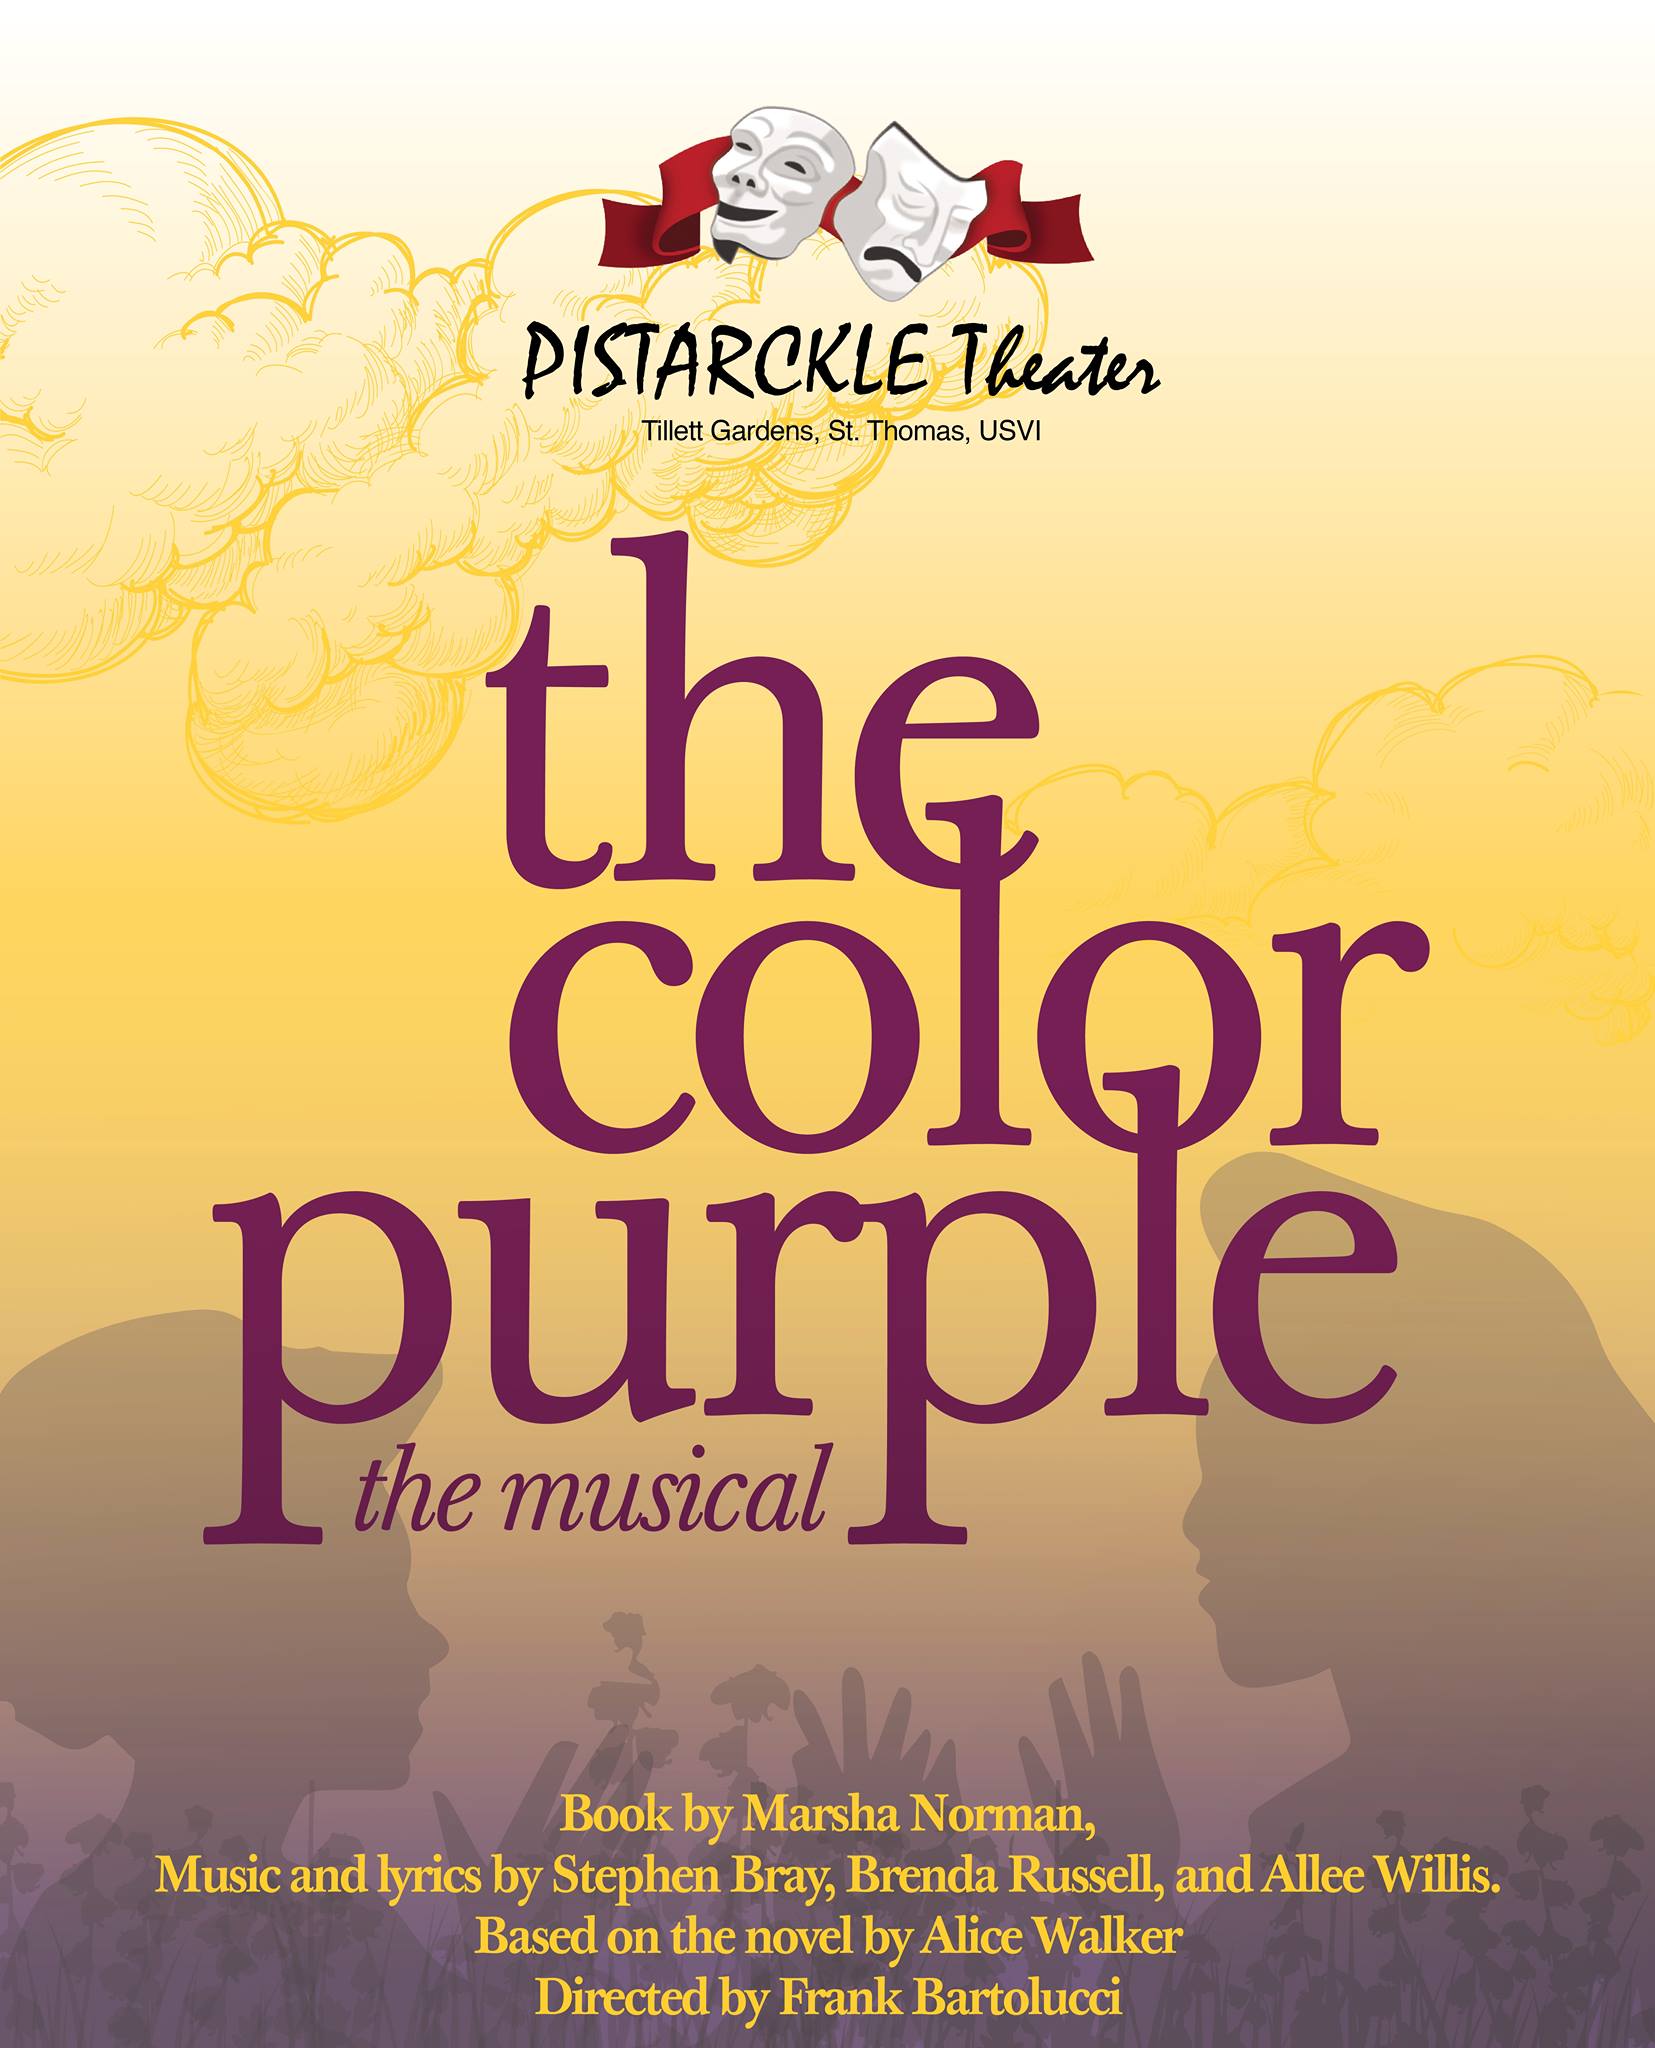 The Color Purple – The Musical comes to Pistarckle Theater